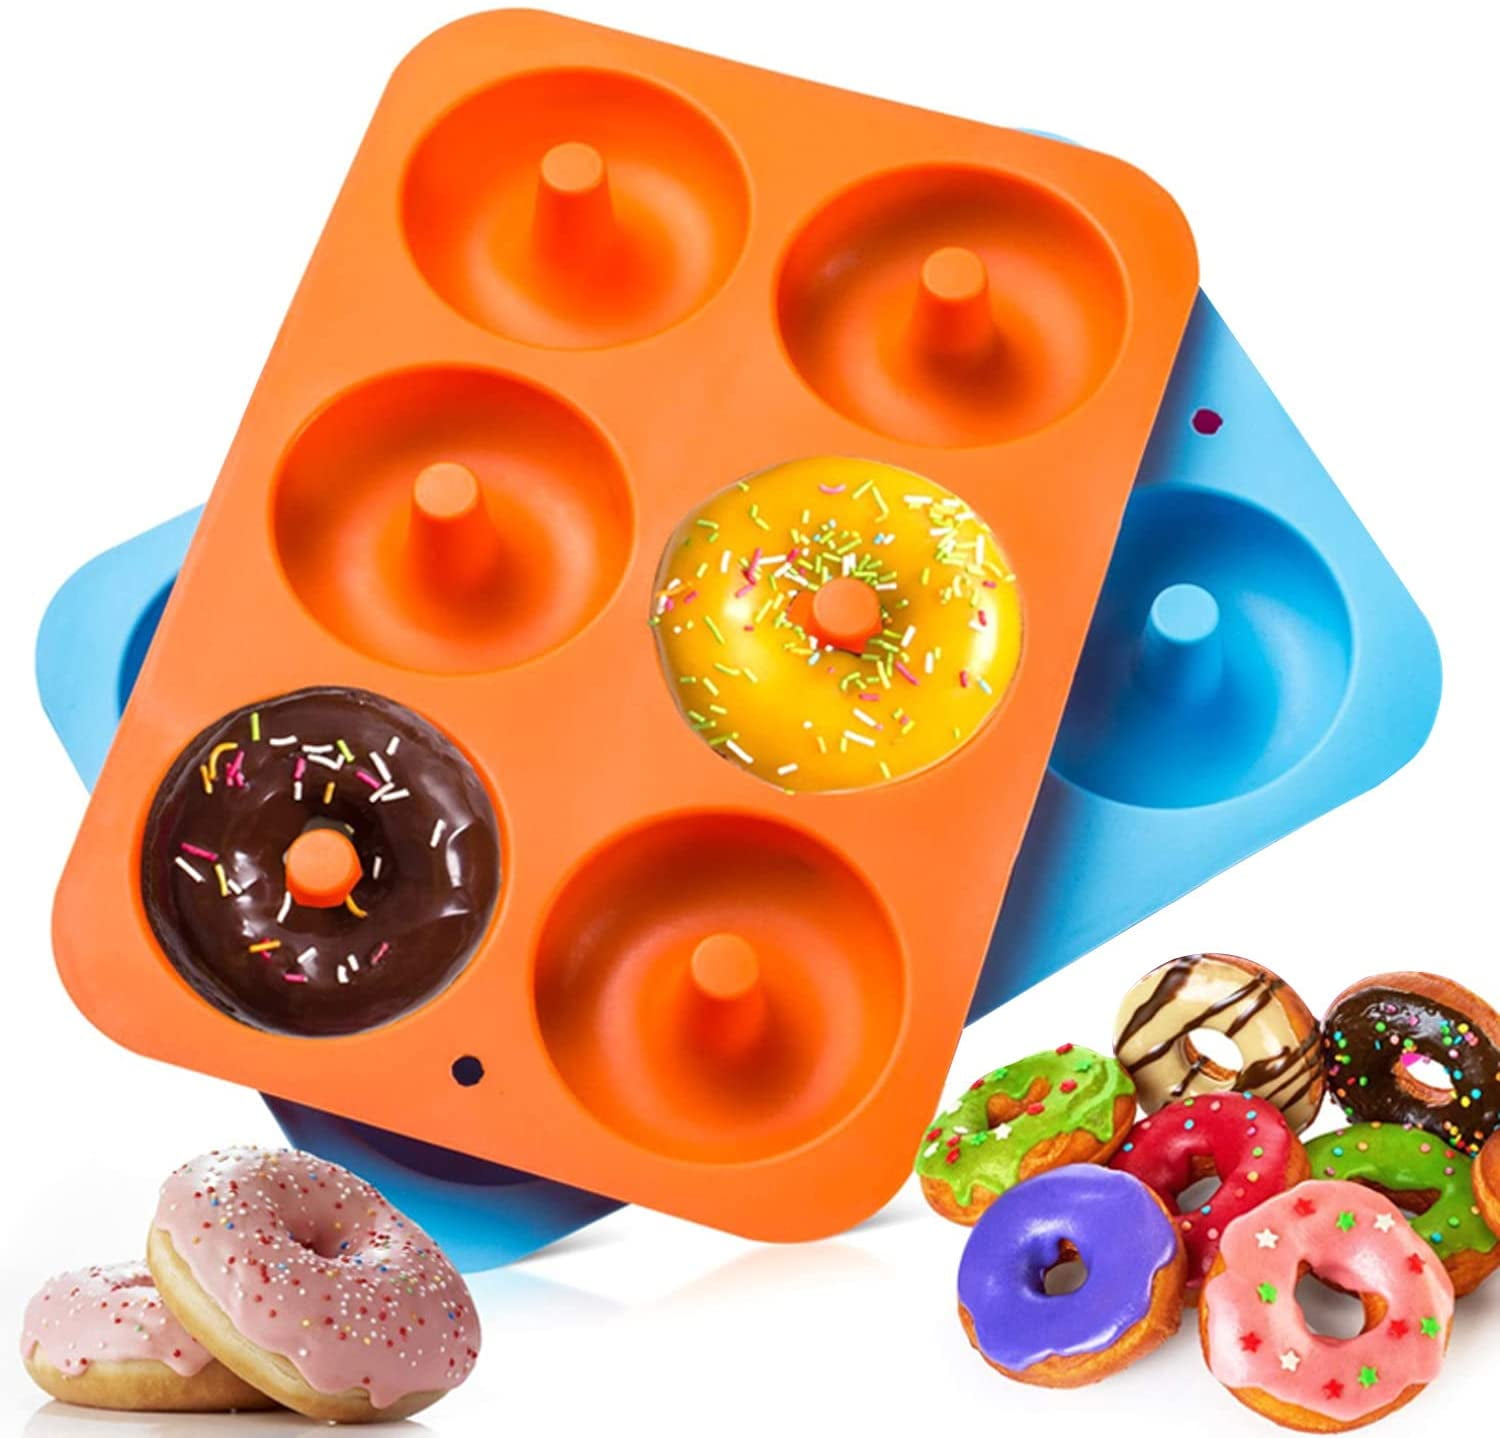 4 Pcs Pumpkin Shaped Cake Bagel Biscuit Baking Pan Dusdombr Donut Baking Molds Easy to Bake Easy to Clean 